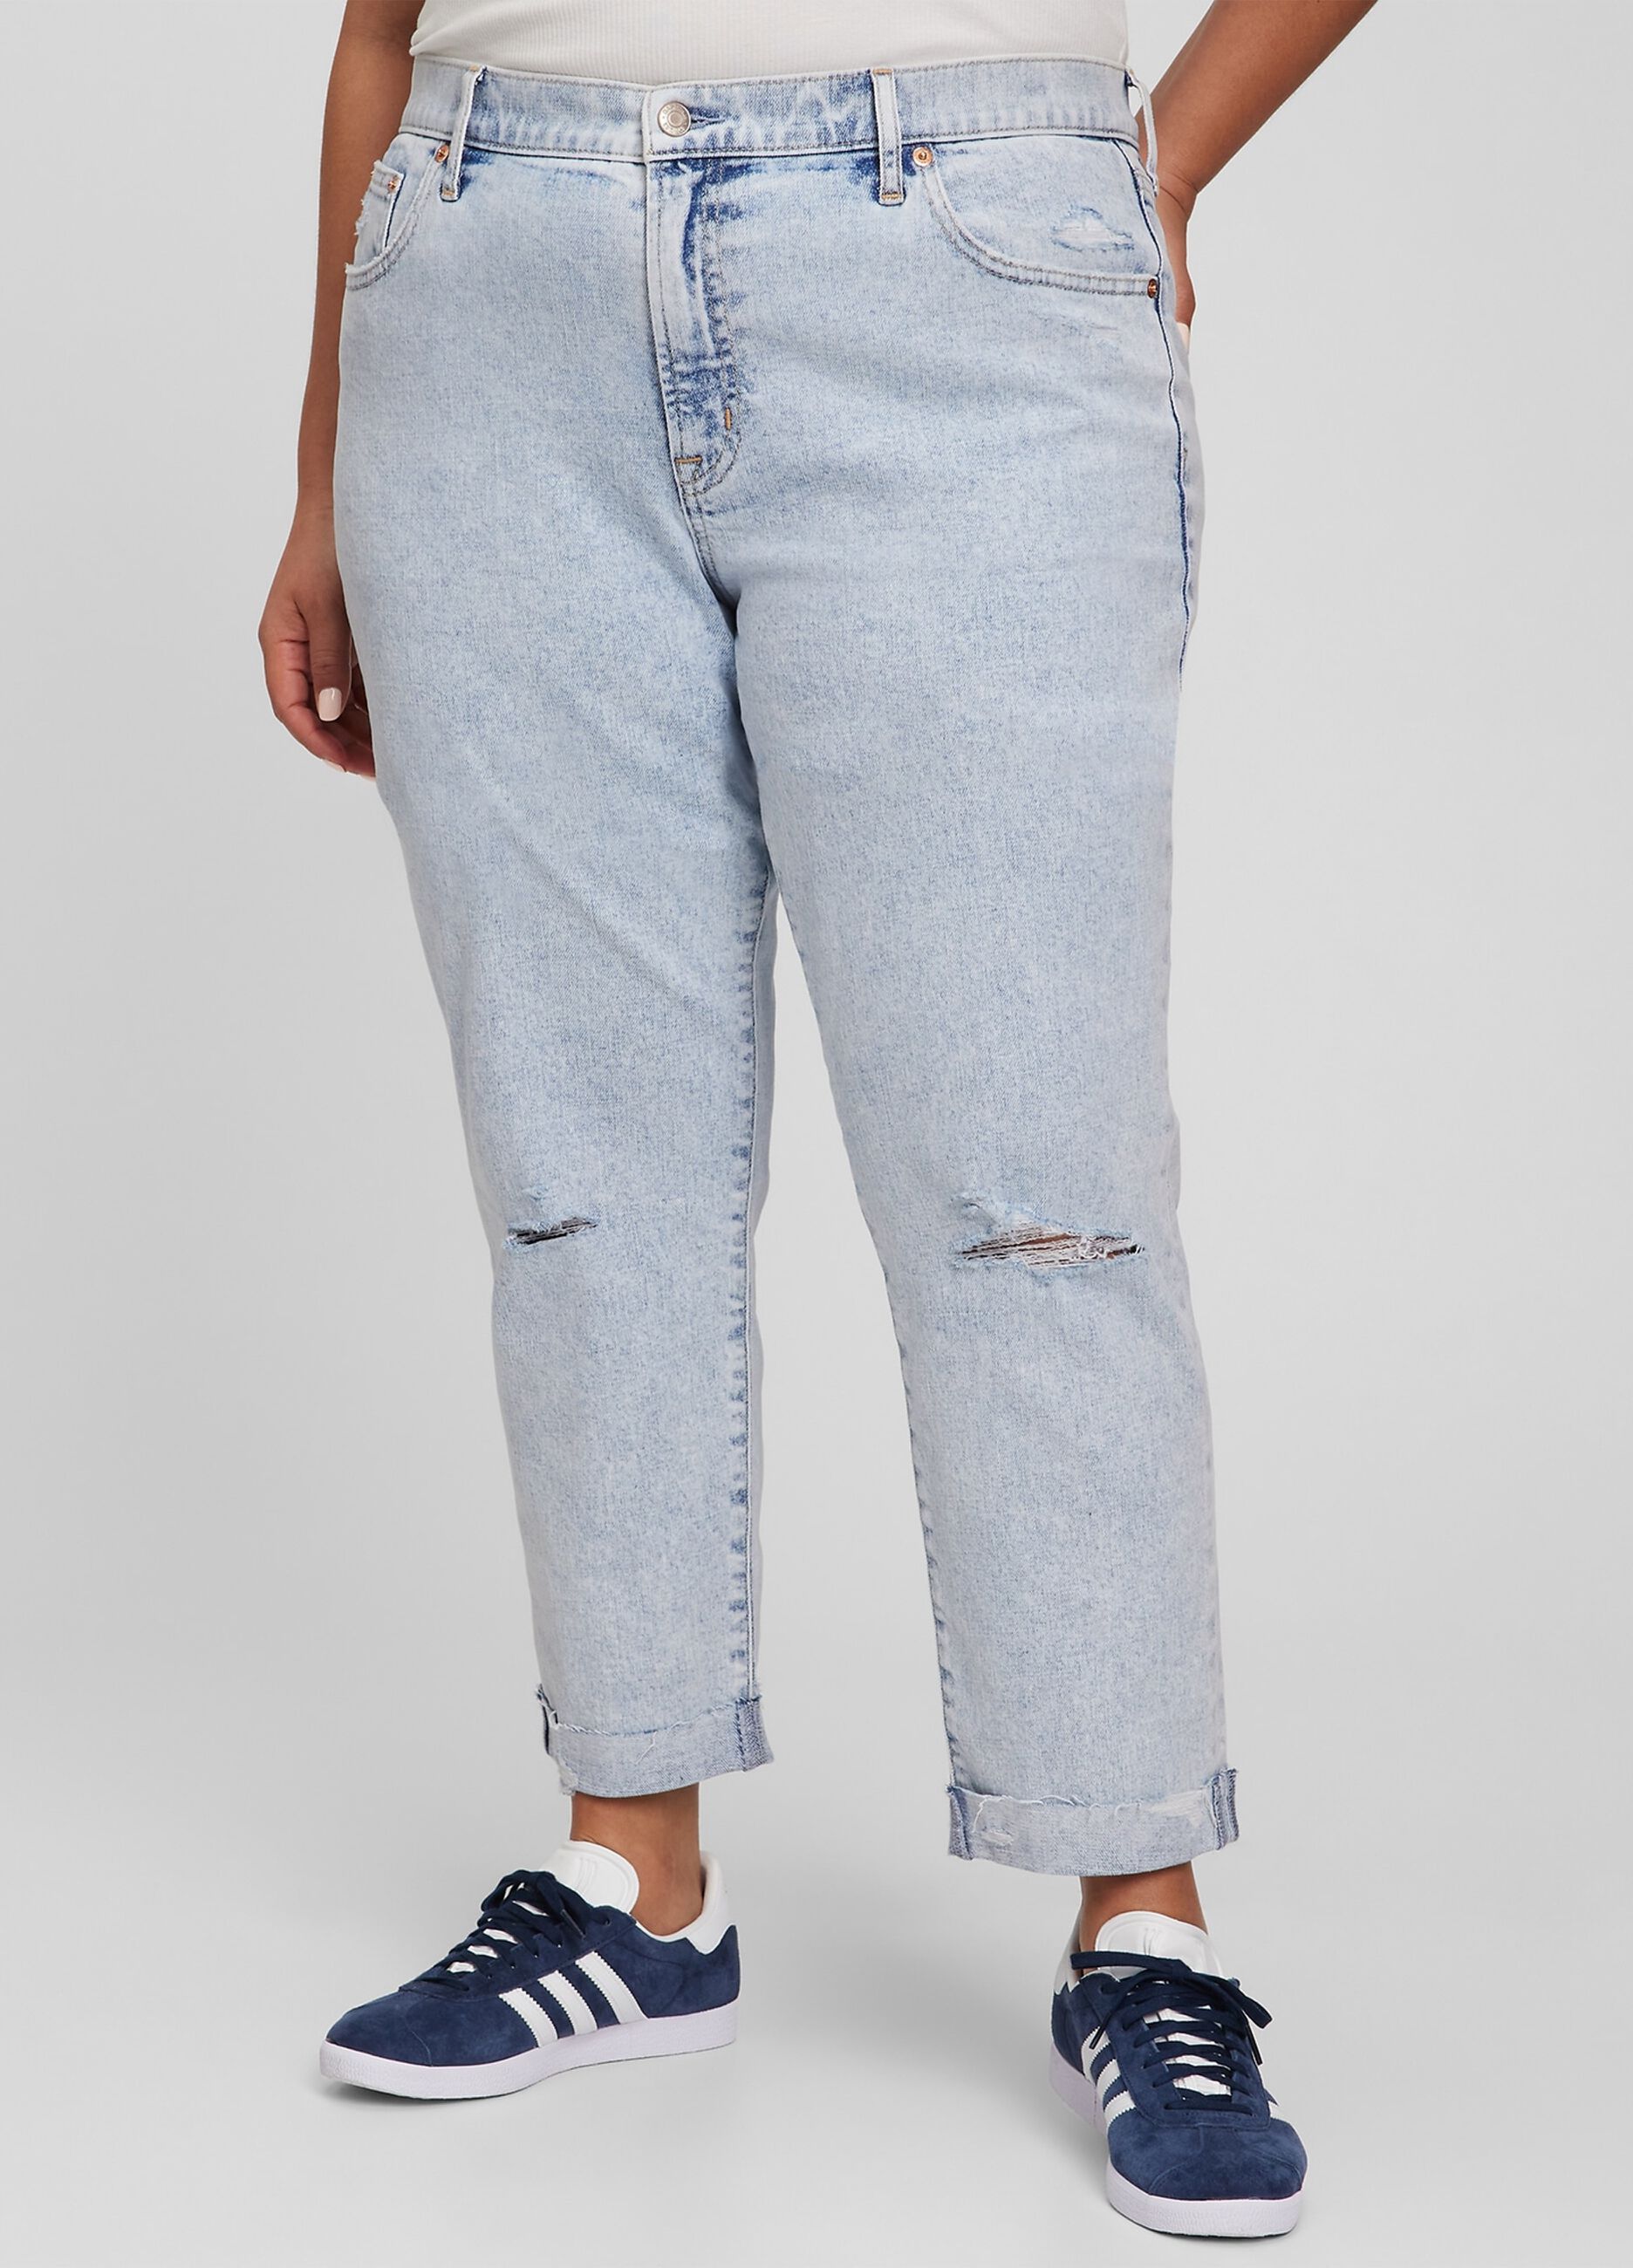 Acid wash girlfriend jeans with rips